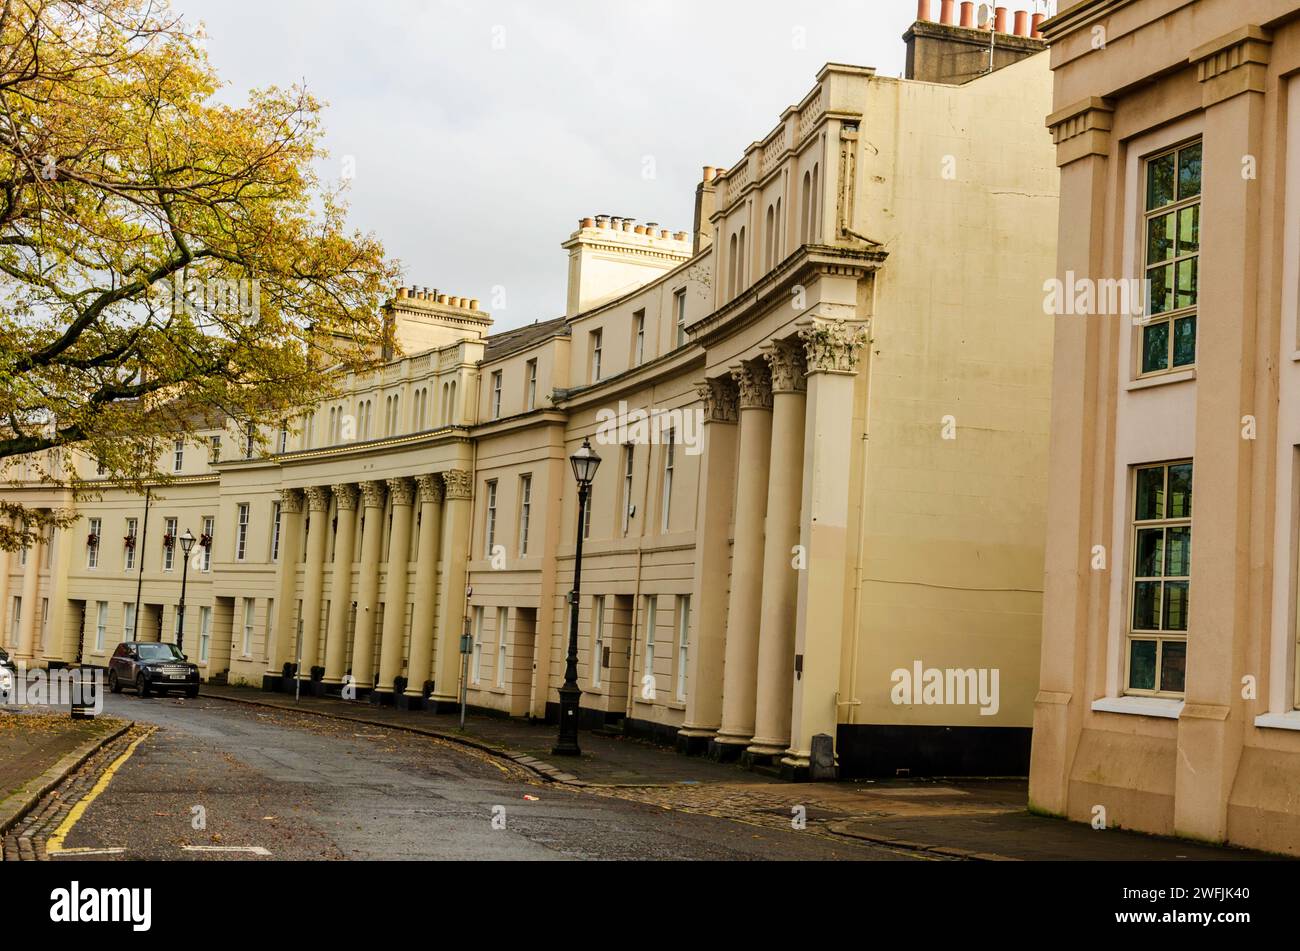 Belfast, County Down, November 18 2023 - Flats and hotel in Regency style buildings in Upper Crescent Belfast Stock Photo